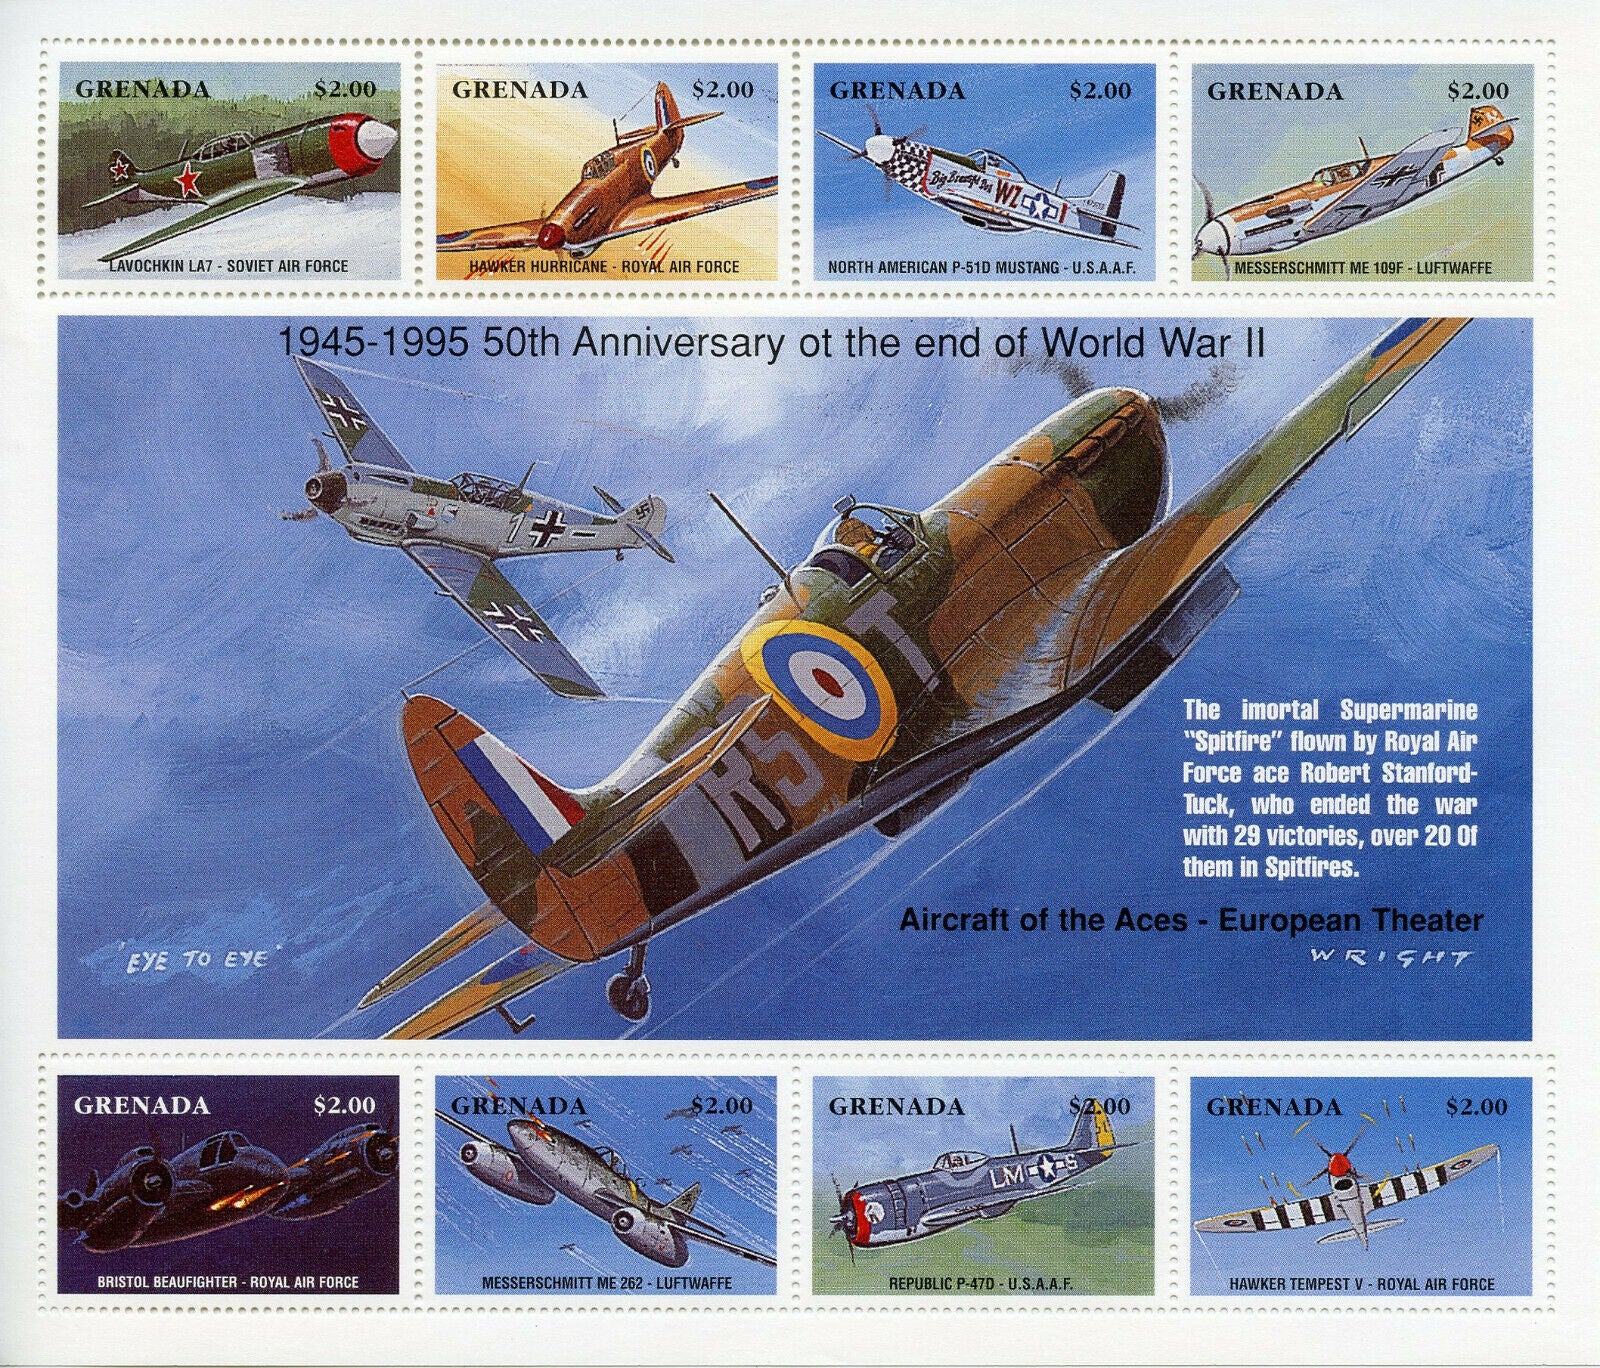 Grenada 1995 MNH MIlitary Aviation Stamps WWII WW2 VE Day End World War II 8v MS